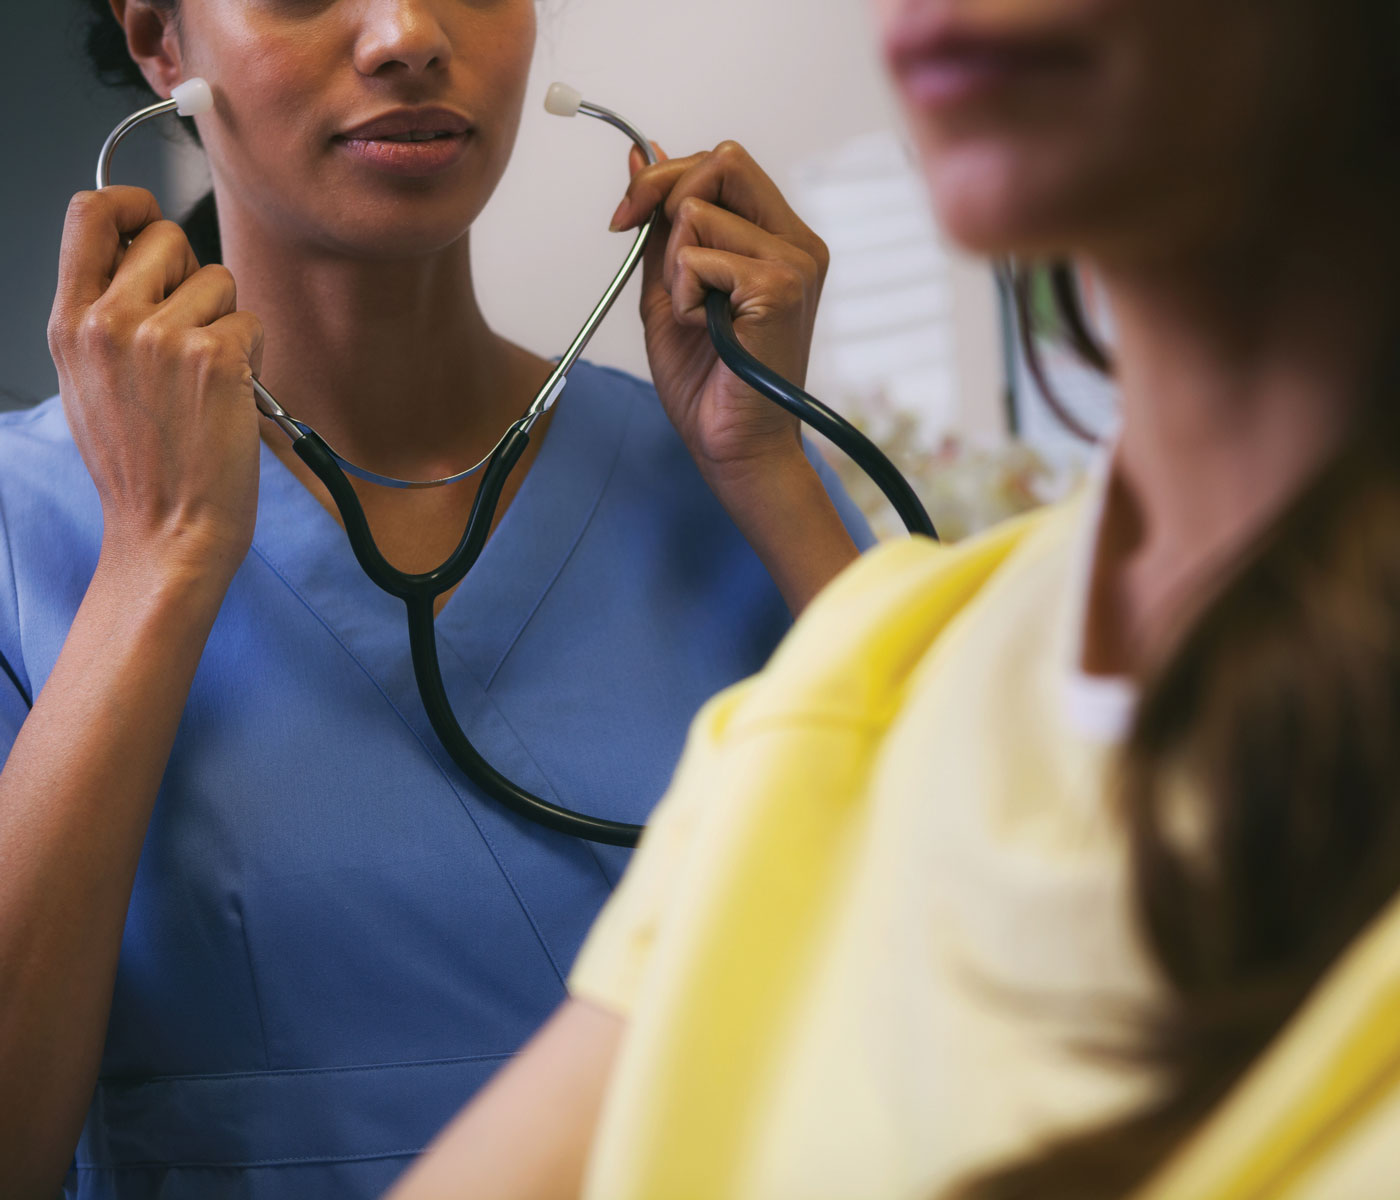 woman puts on stethoscope with another woman in the foreground